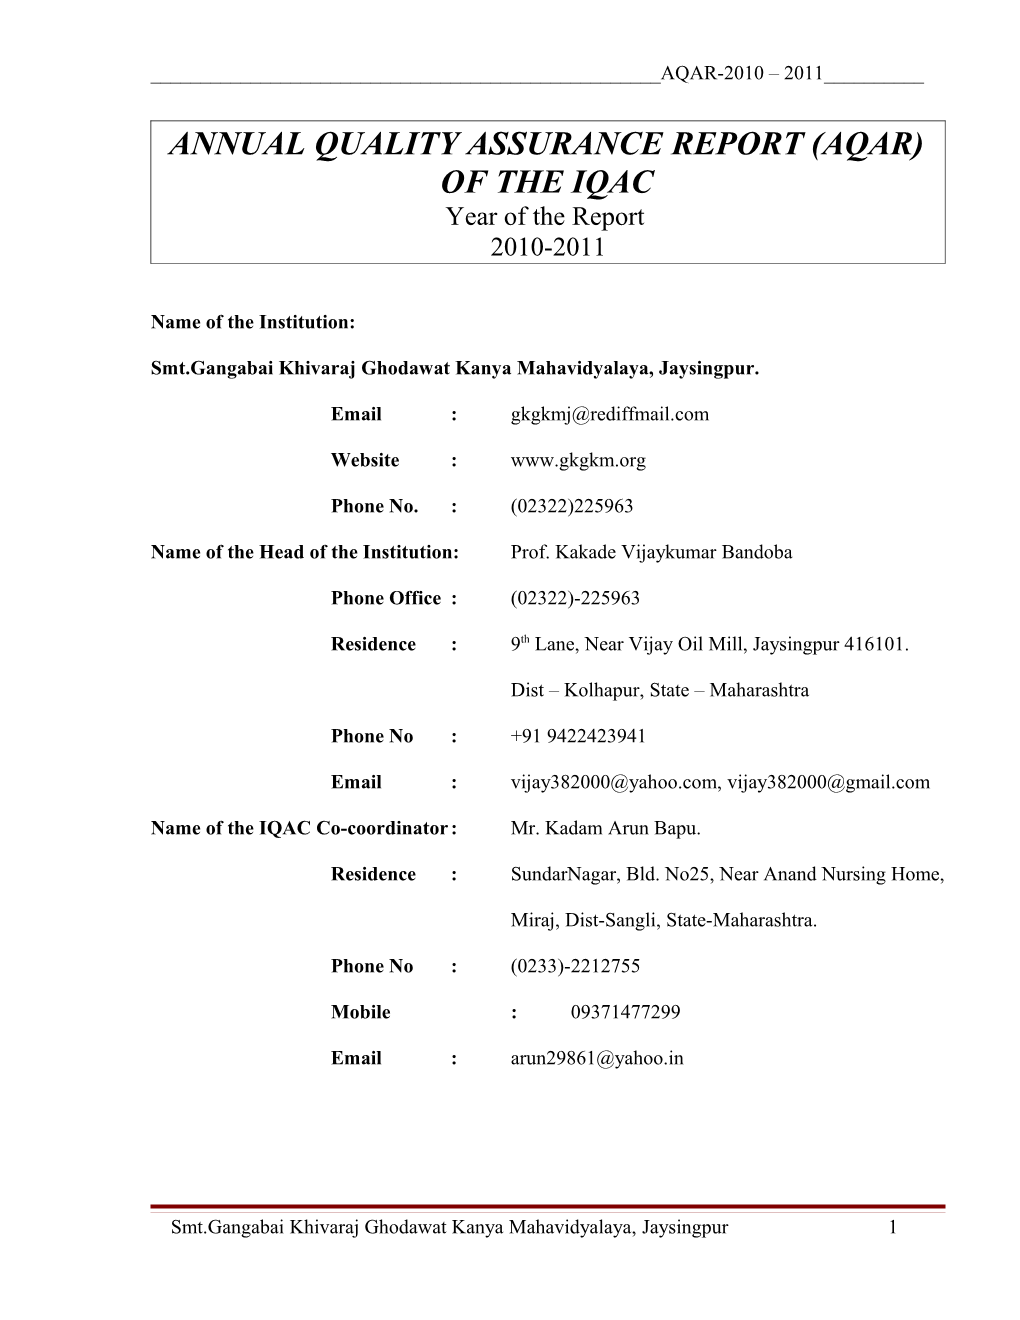 ANNUAL QUALITY ASSURANCE REPORT (AQAR) of the IQAC Year of the Report 2010-2011